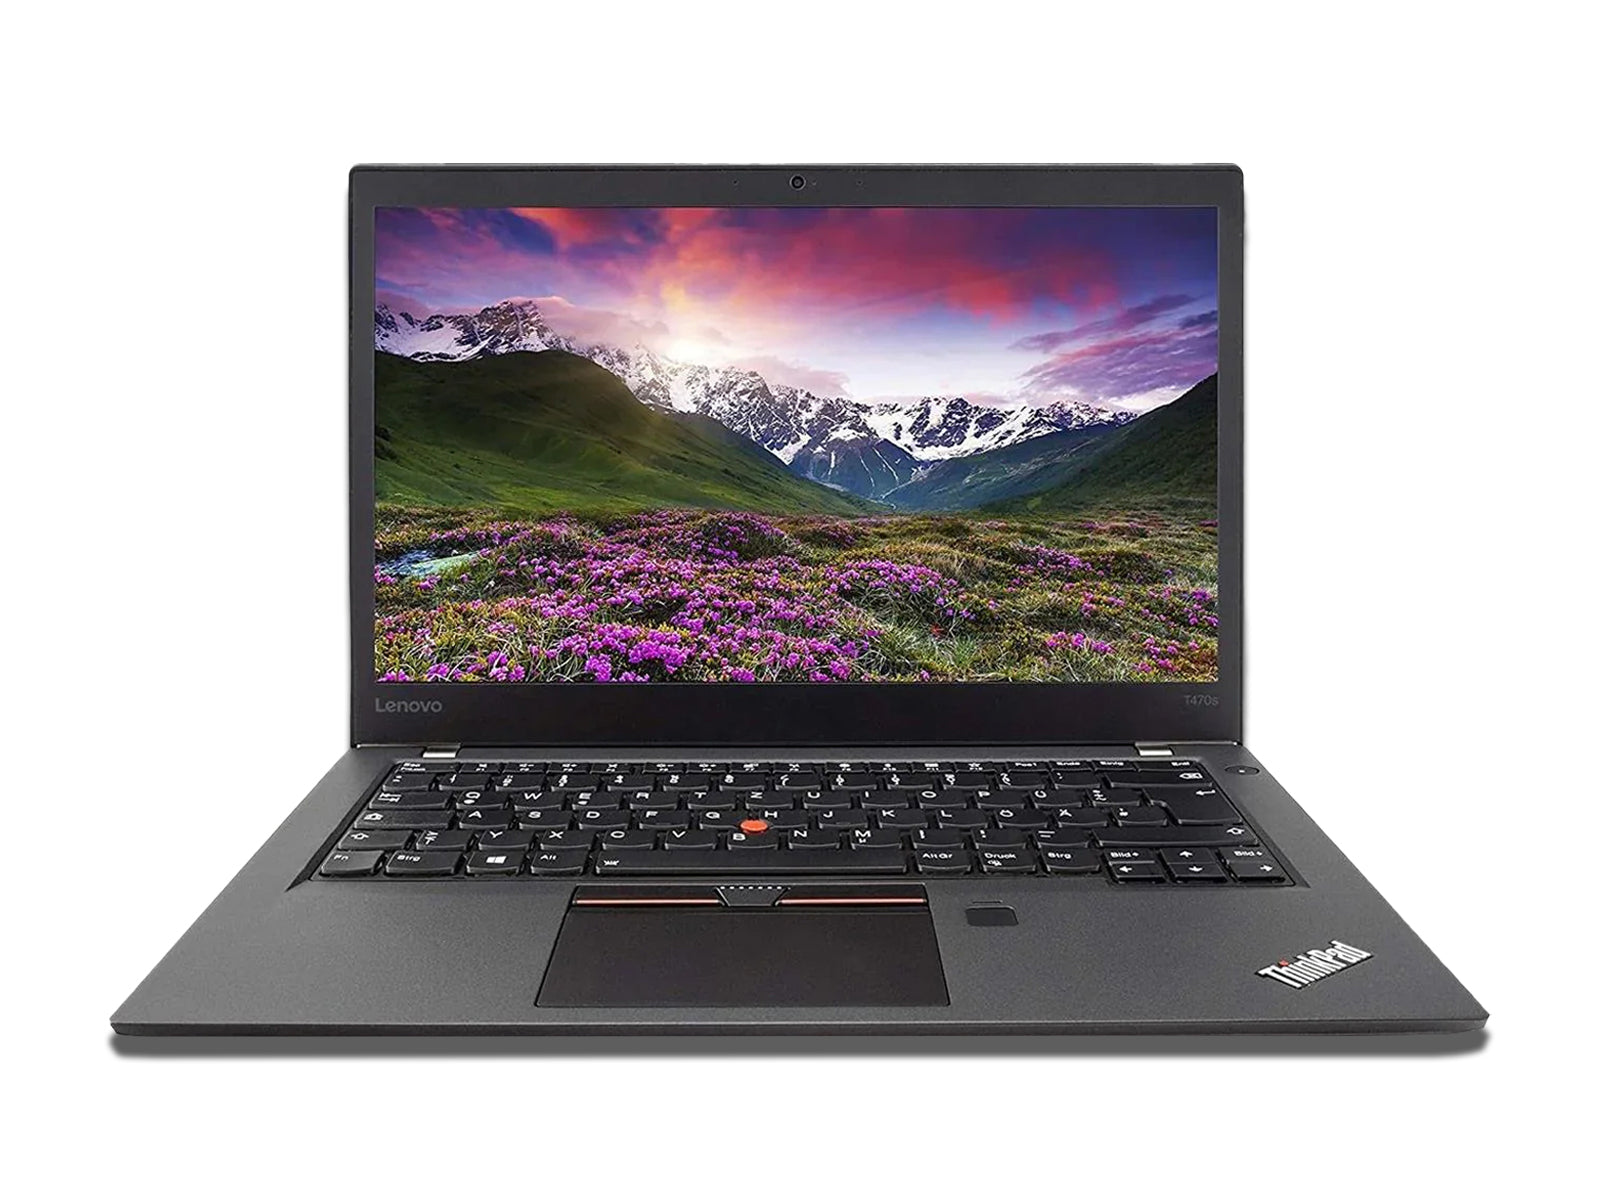 Image of The Lenovo T470s Front View on The White Background